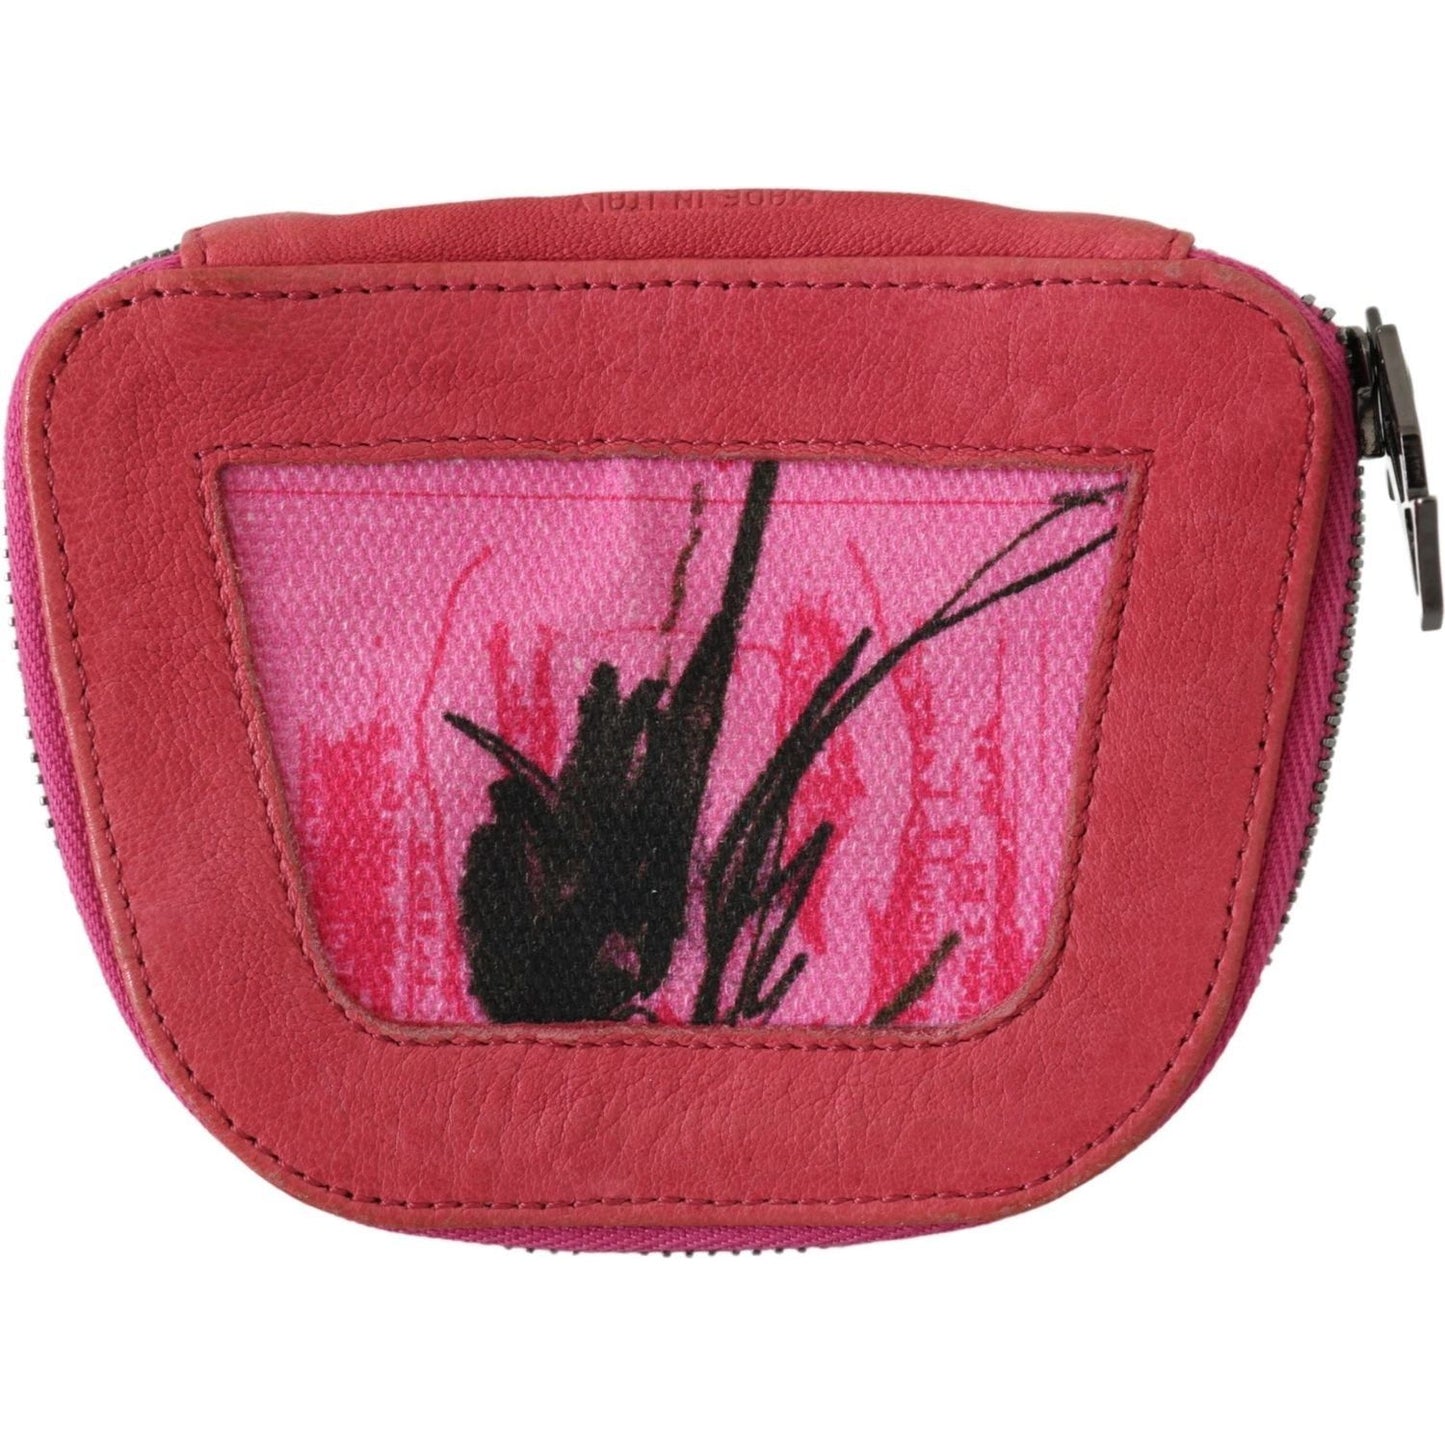 PINKO Elegant Pink Fabric Coin Wallet pink-suede-printed-coin-holder-women-fabric-zippered-purse Purse IMG_0183-scaled-341309a0-7ba.jpg